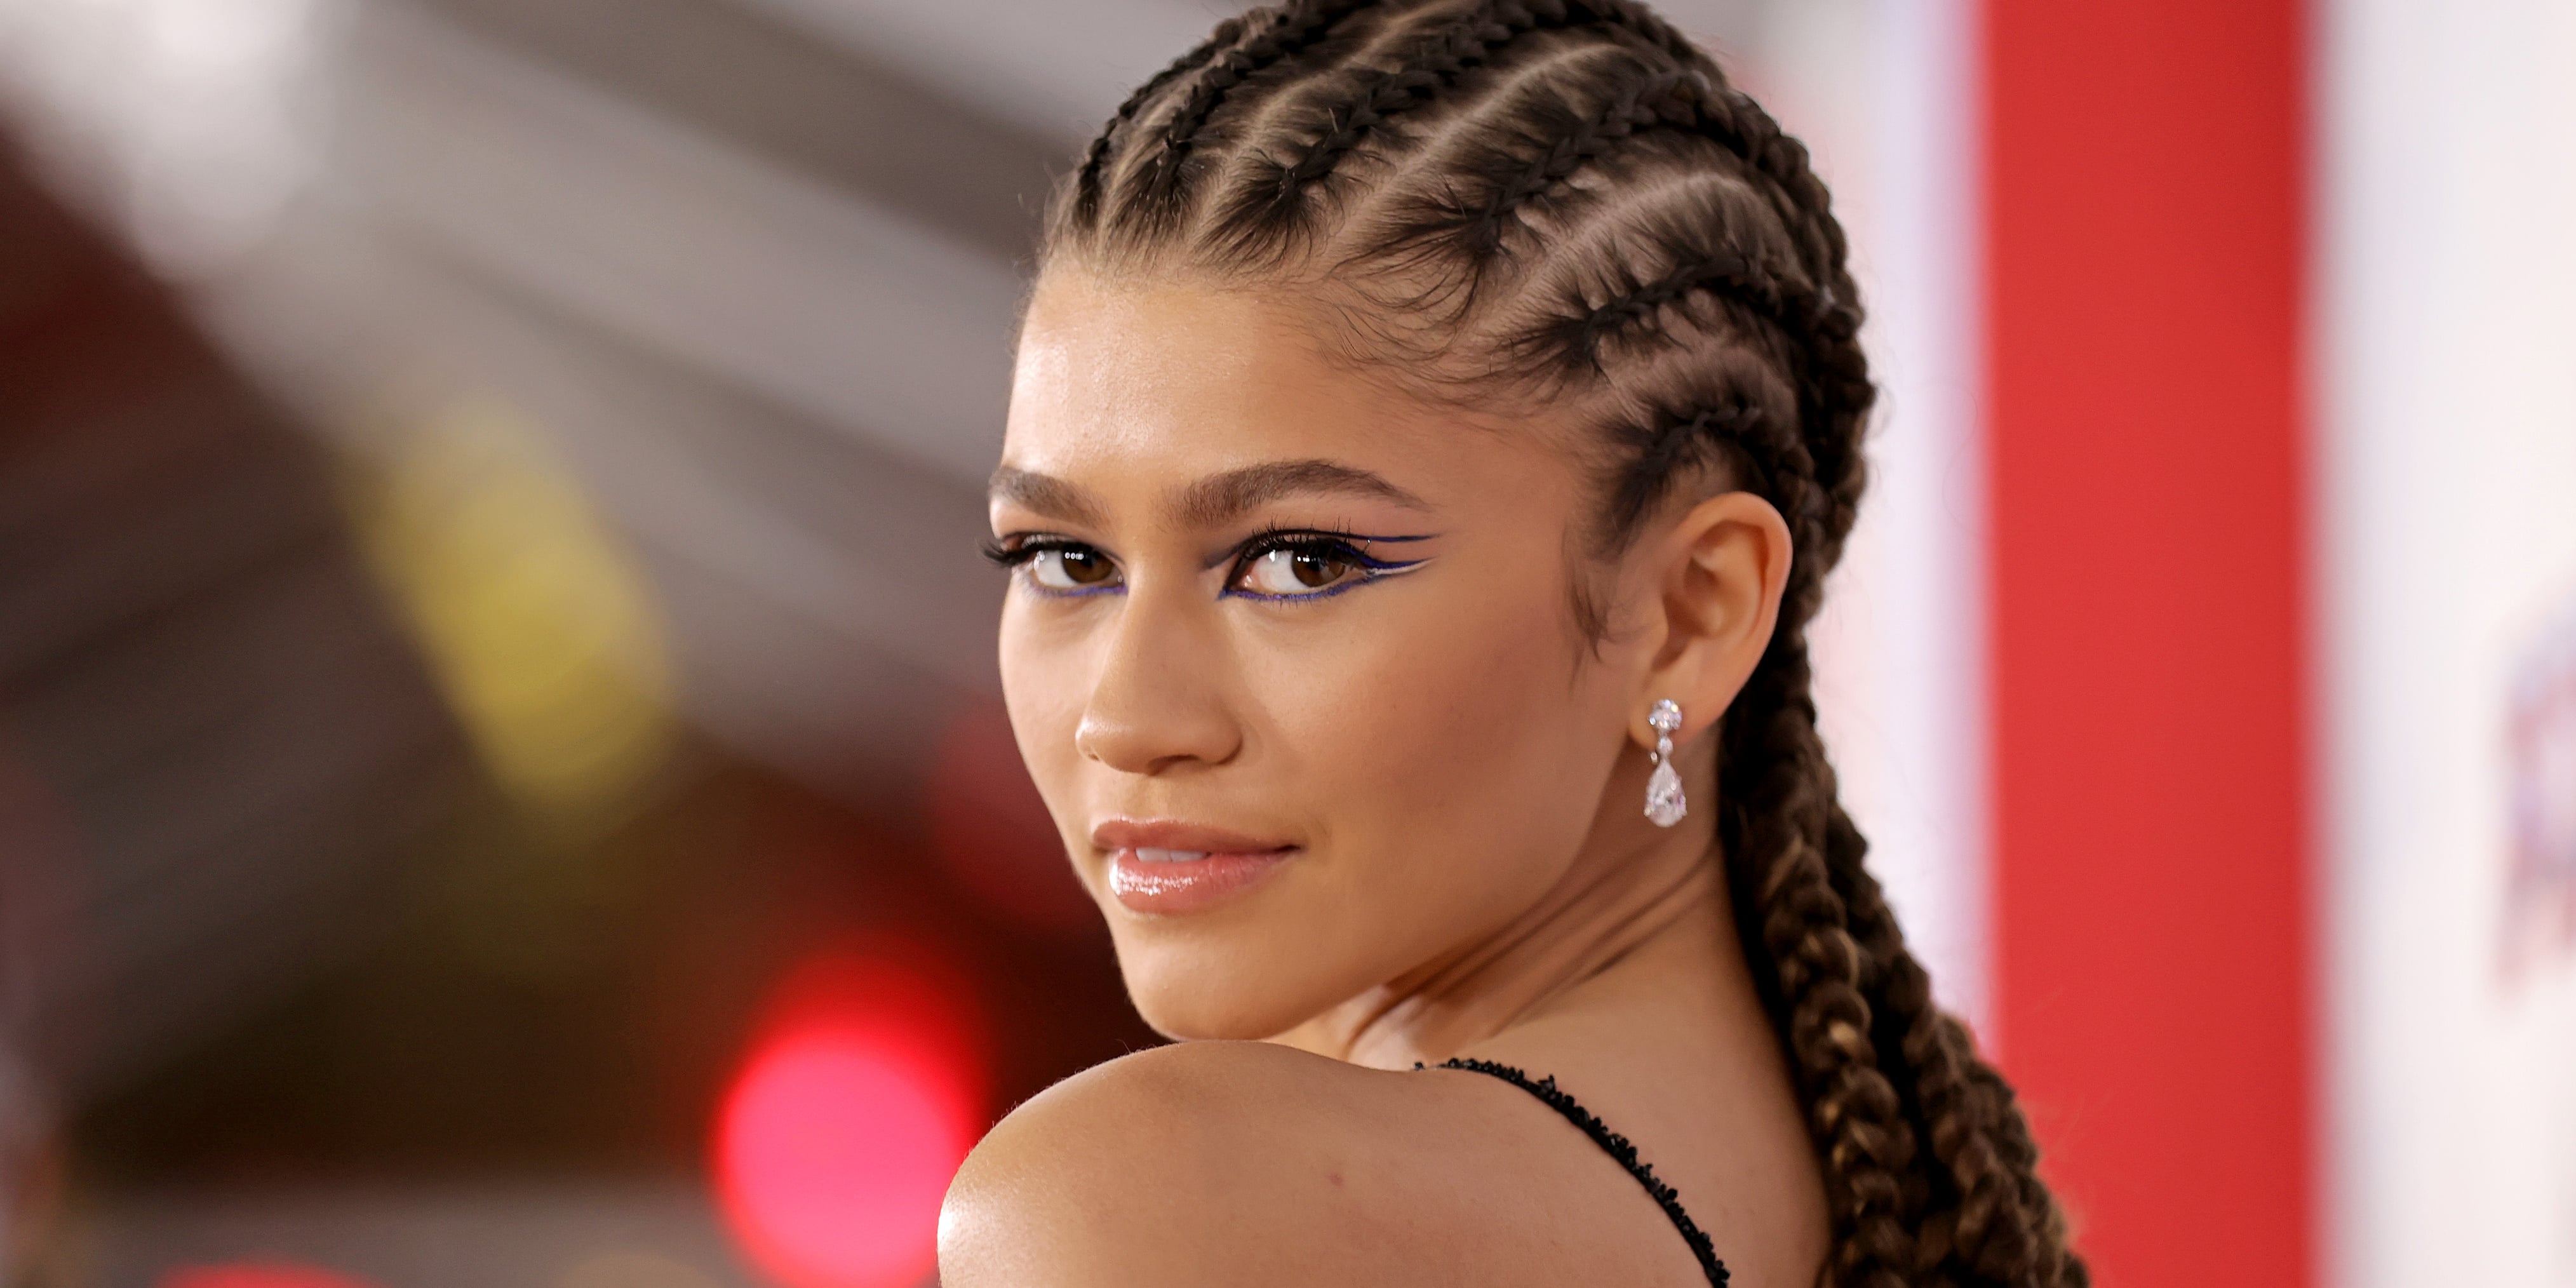 Micro Braids: Everything You Need To Know About The Protective Style